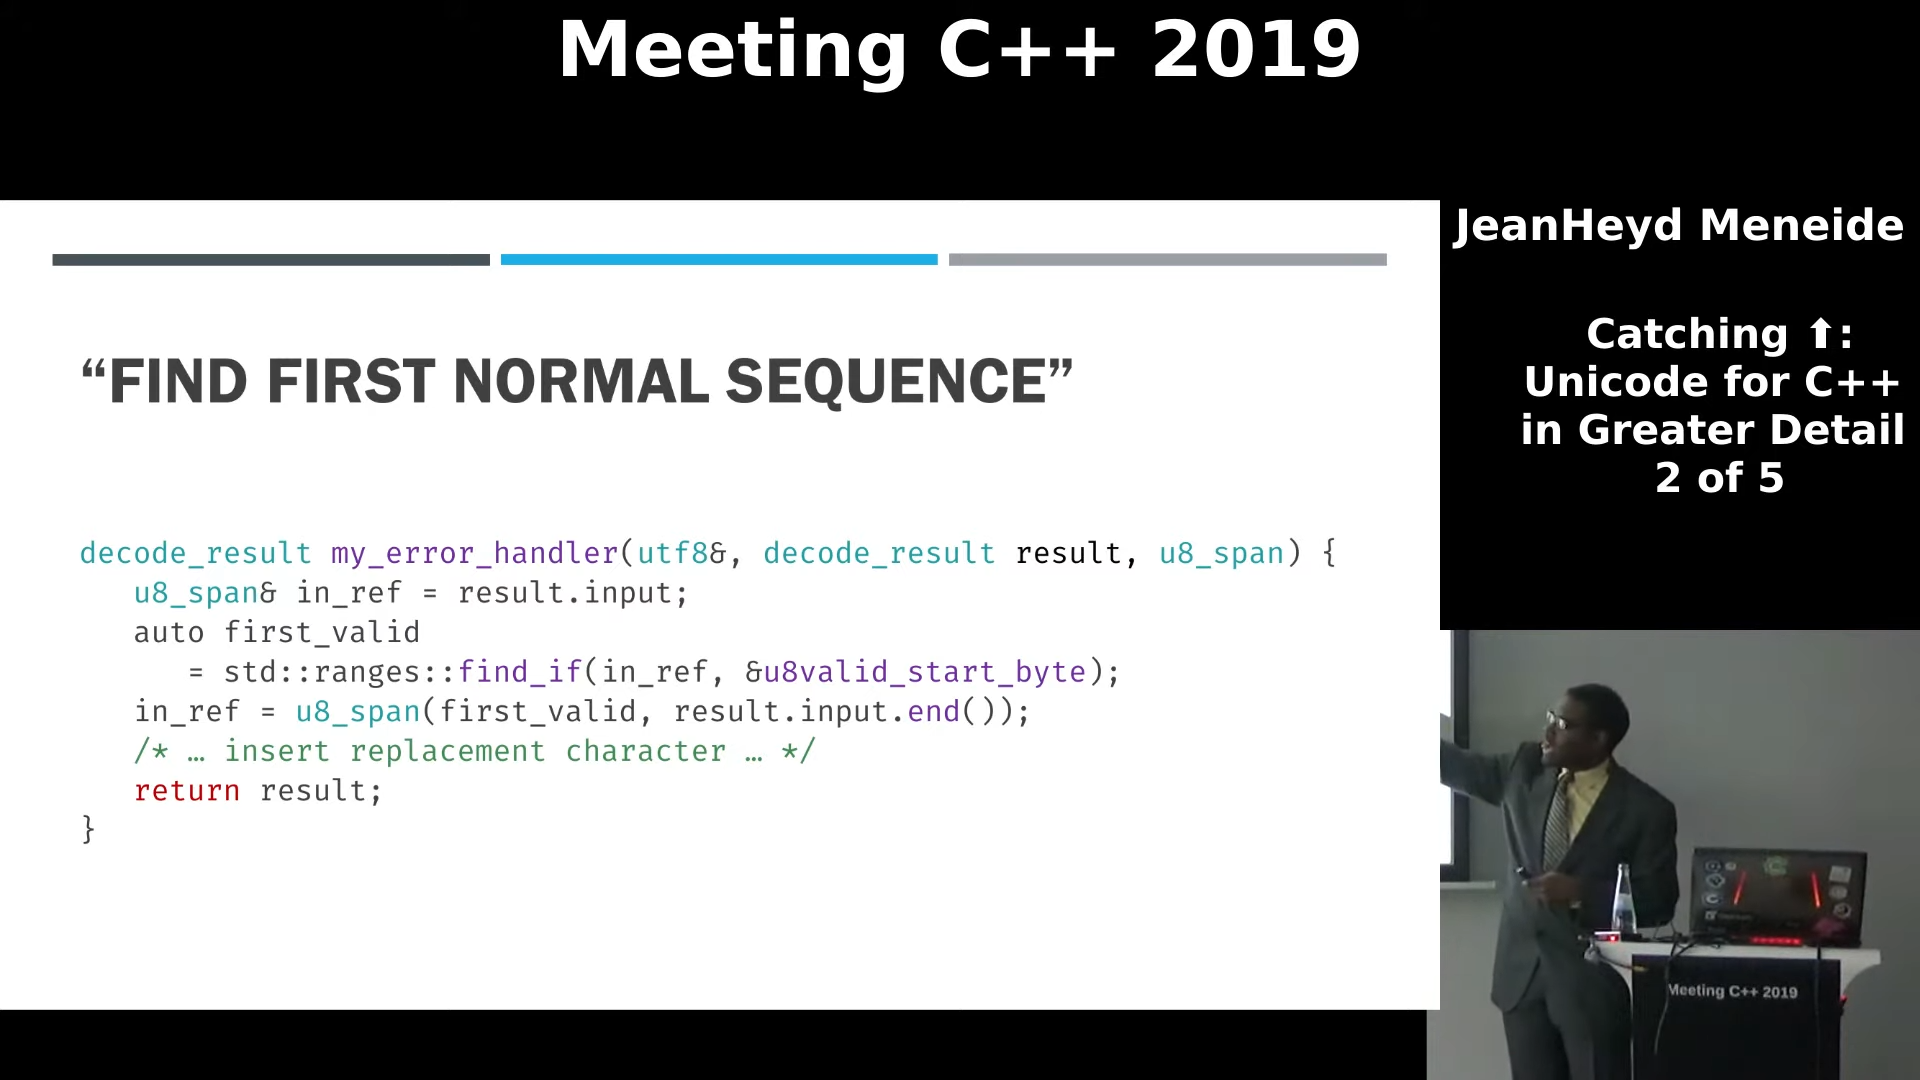 "Find First Normal Sequence" Screenshot of Meeting C++ 2019 Presentation called "Catching ⬆: Unicode for C++ in Greater Detail"